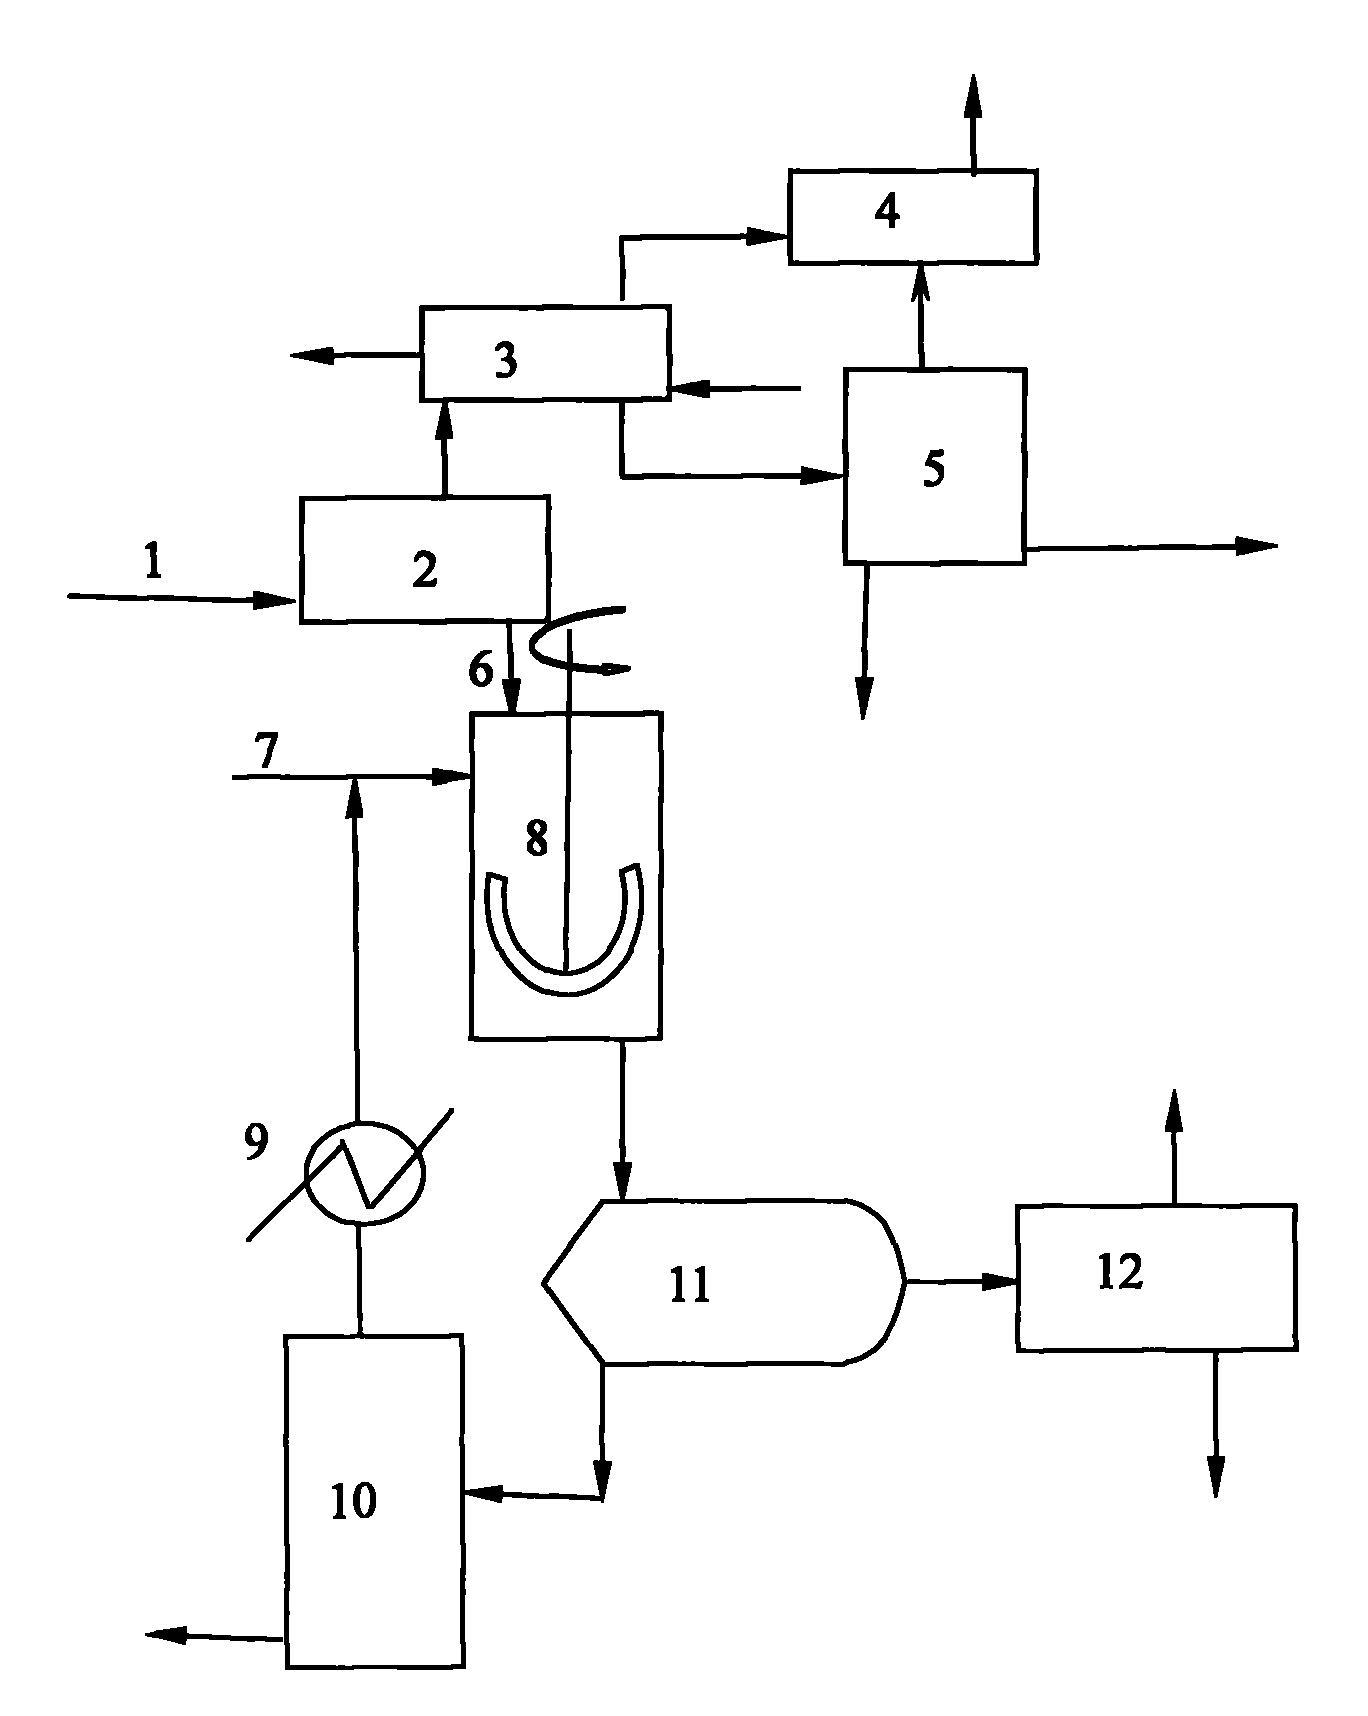 Process for treating oily sludge